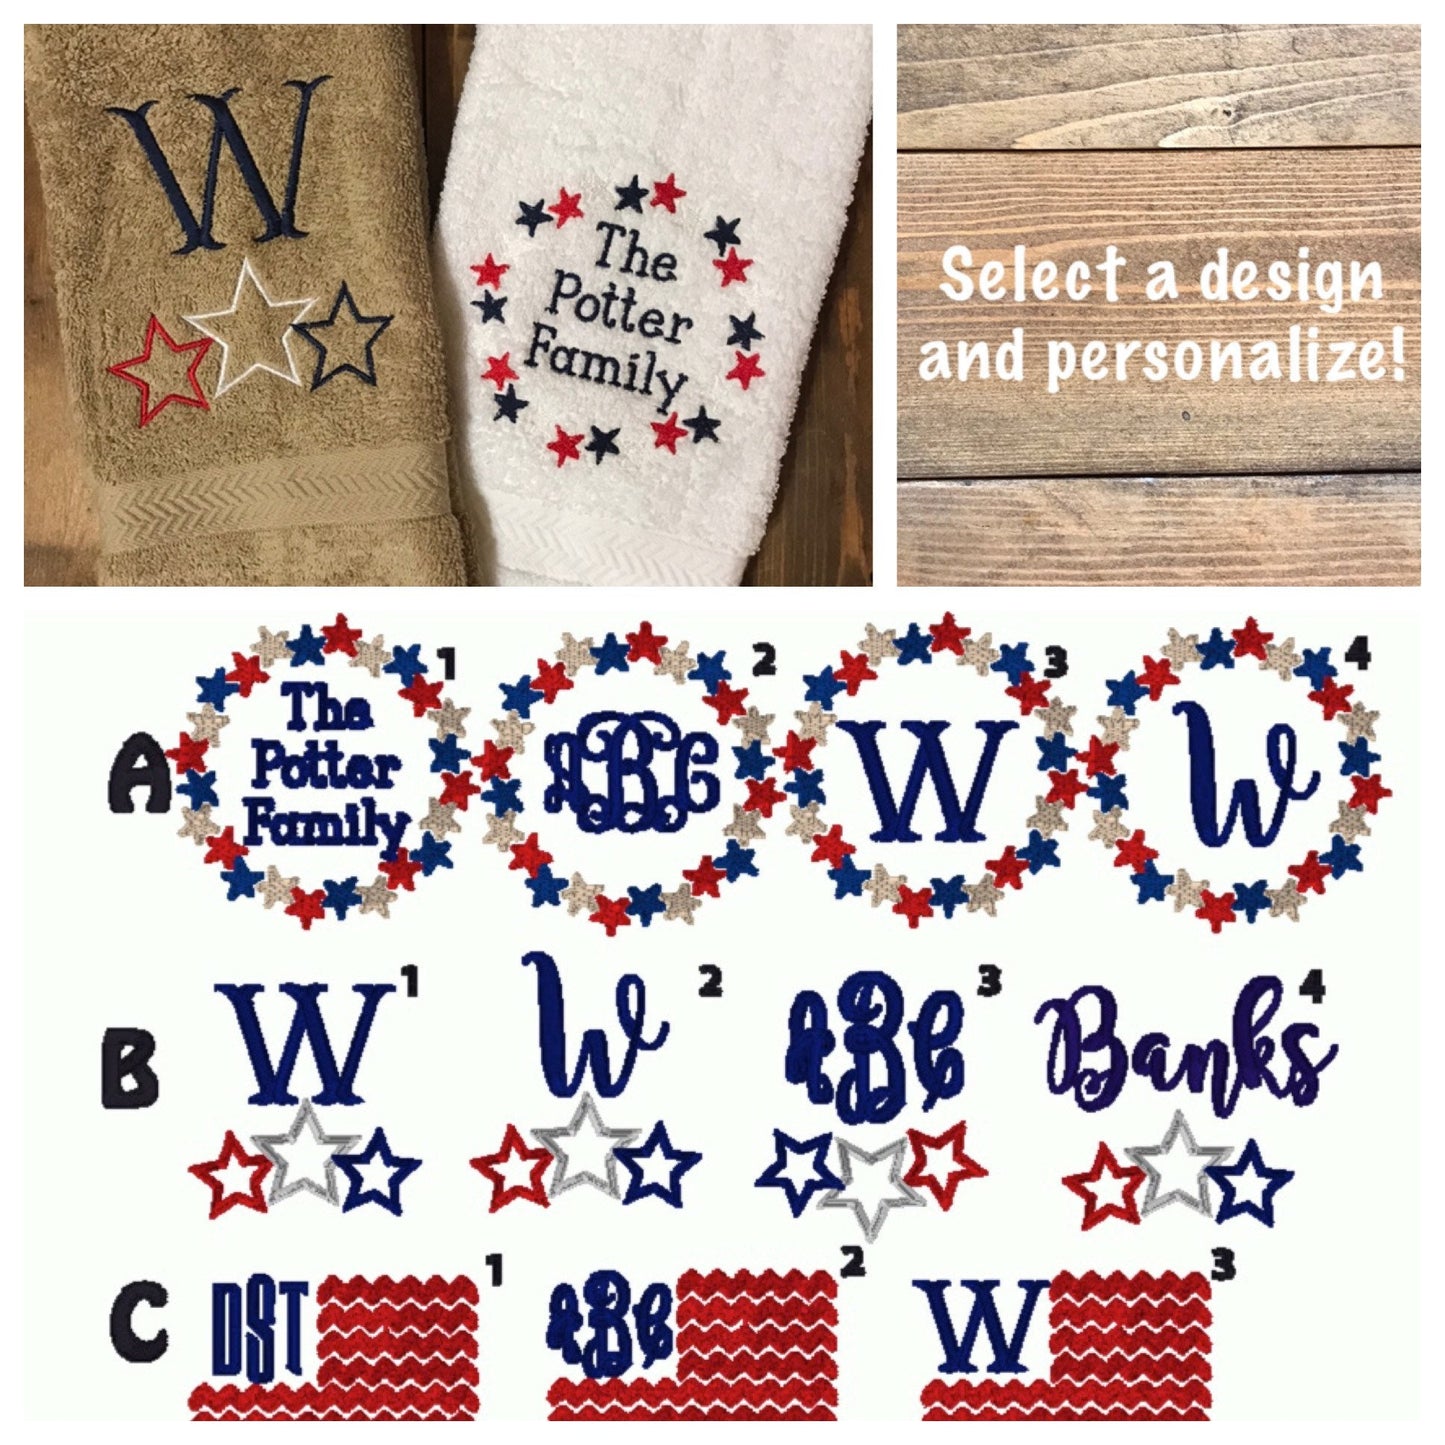 Patriotic Personalized Bathroom Hand Towels -Cotton- Embroidered-Great for boat